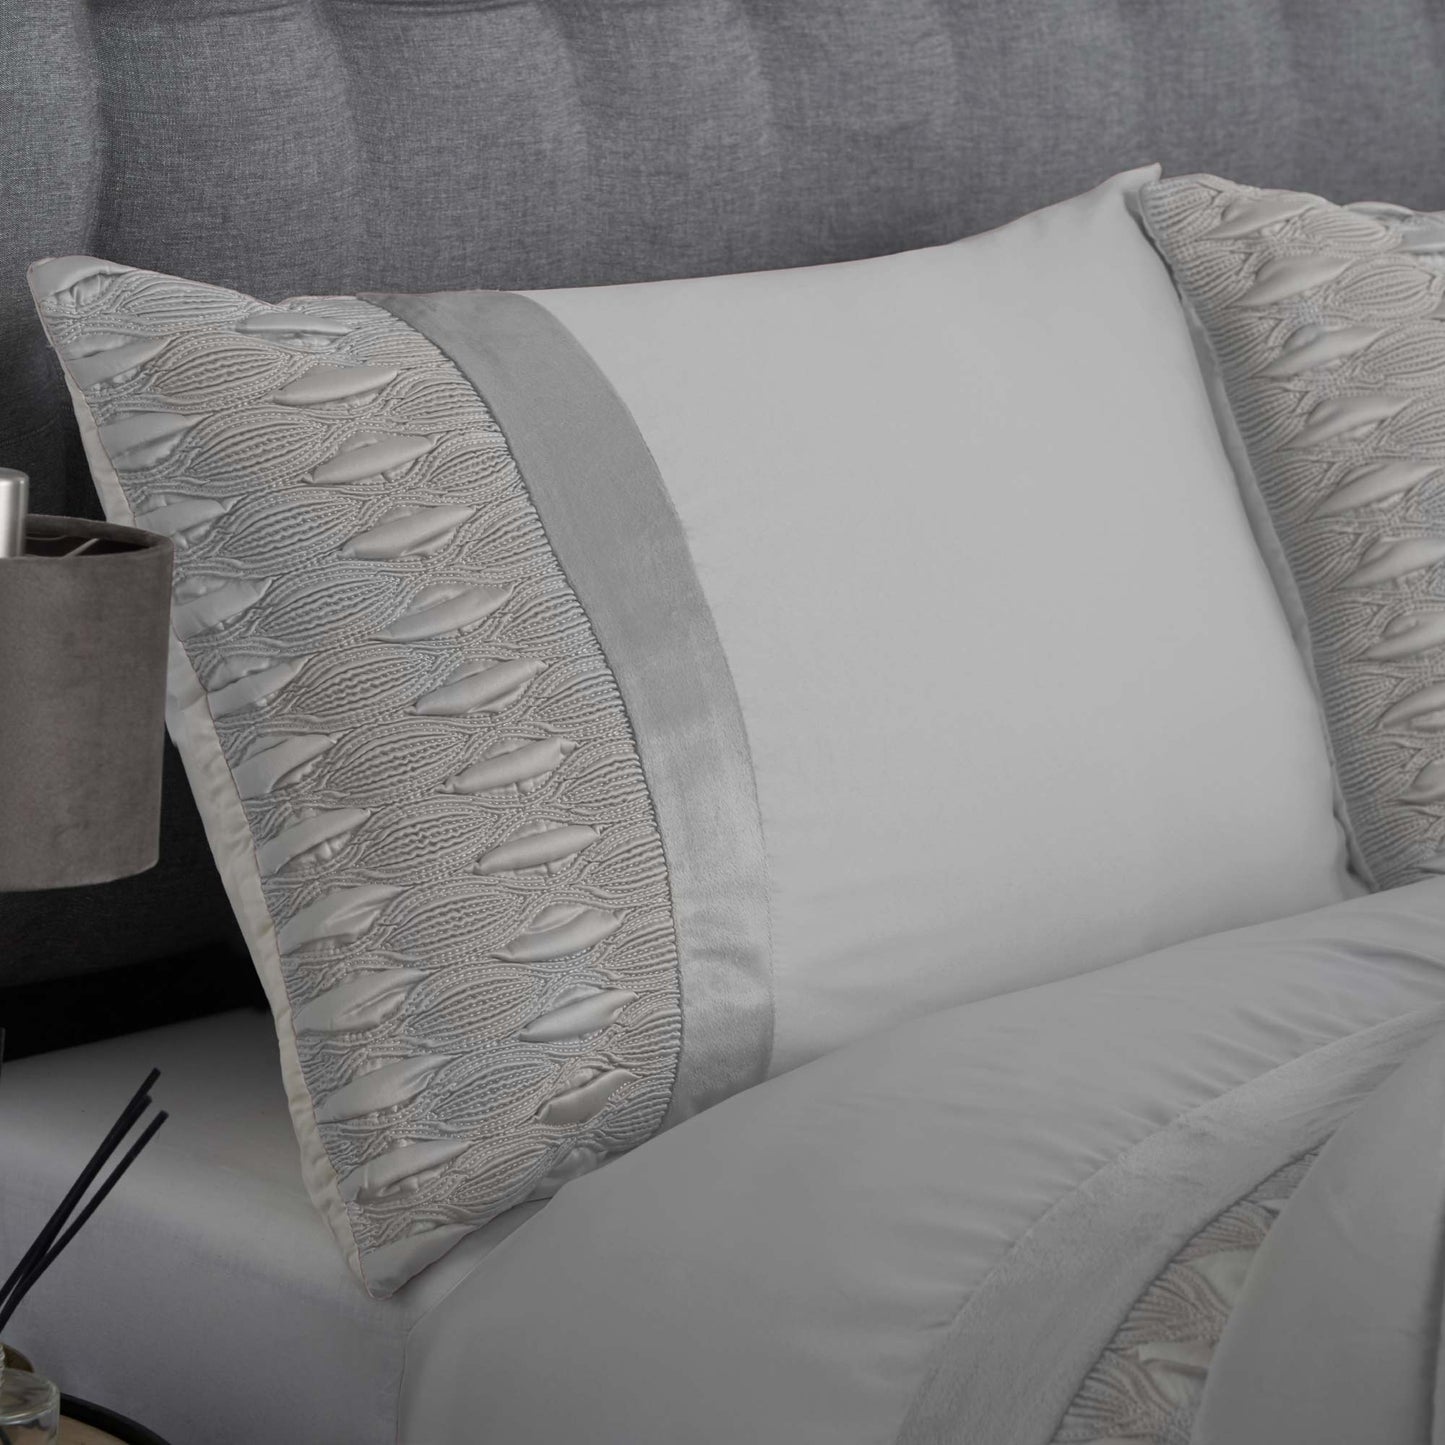 Aria Quilted Satin Panel Luxury Duvet Set - Silver